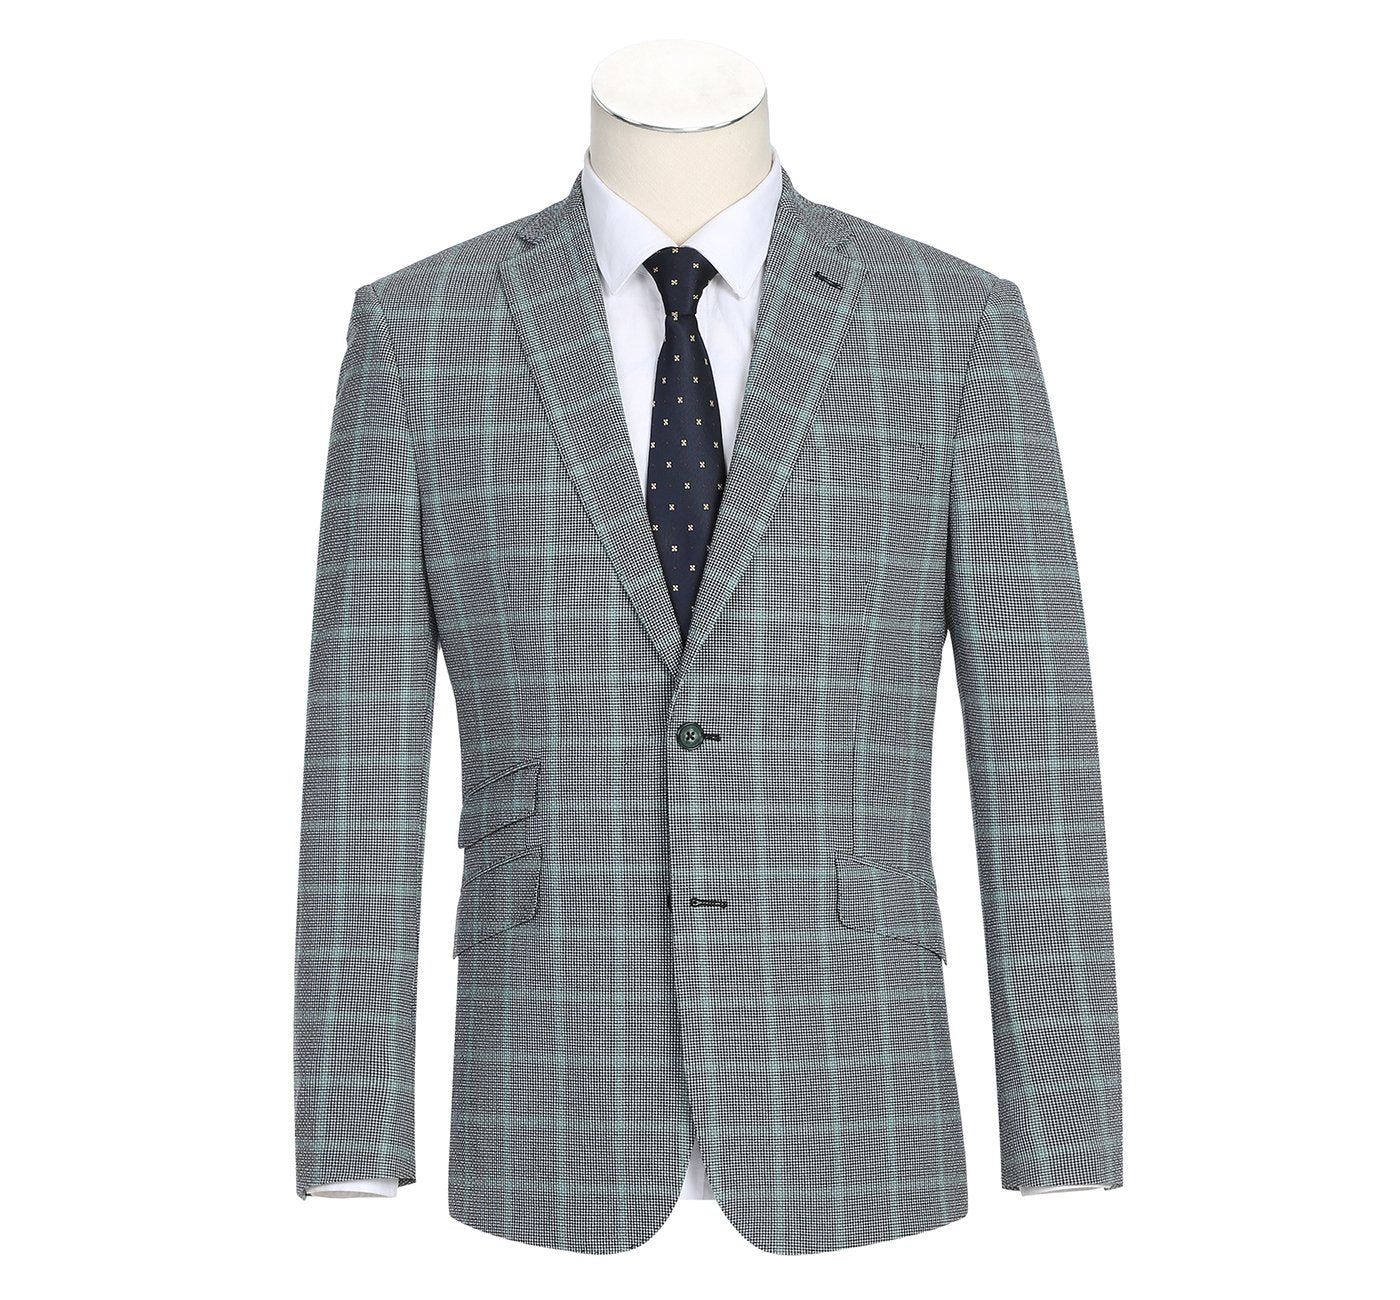 English Laundry Men's Slim-Fit Single Breasted Windowpane Stretch Suit